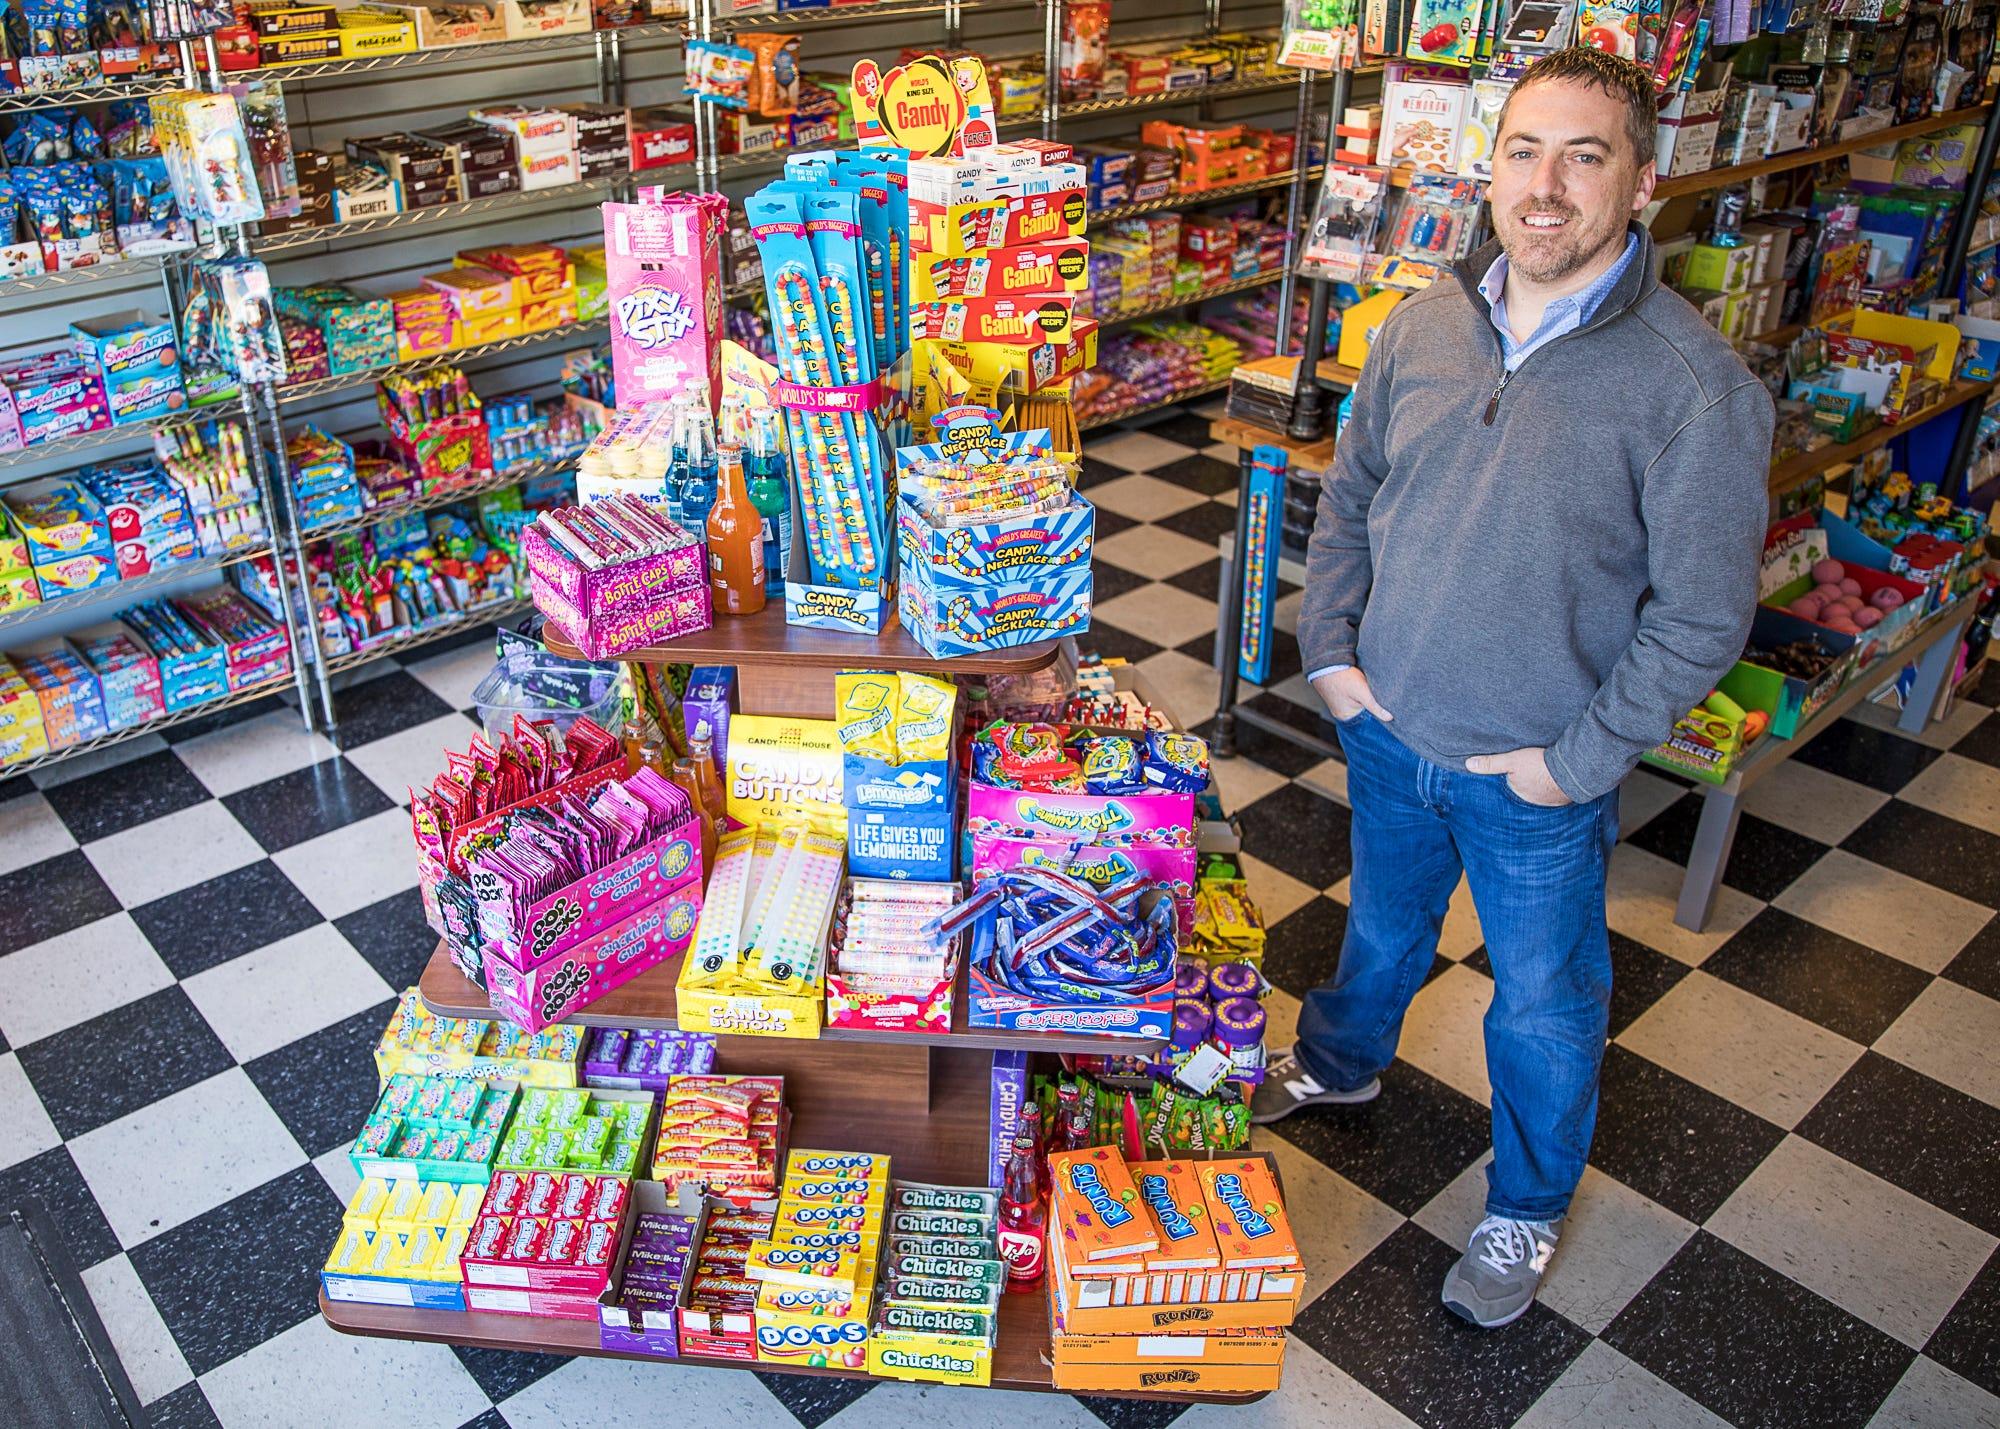 Pittsburgh native Chris Beers bought local candy store Lloyd’s Sweet Shoppe and added it to his chain Grandpa Joe’s Candy Shop. Beers owns candy stores in Pennsylvania and Ohio and named it after the grandfather in Willy Wonka who jumps out of bed and goes with Charlie on the tour of the Wonka chocolate factory.